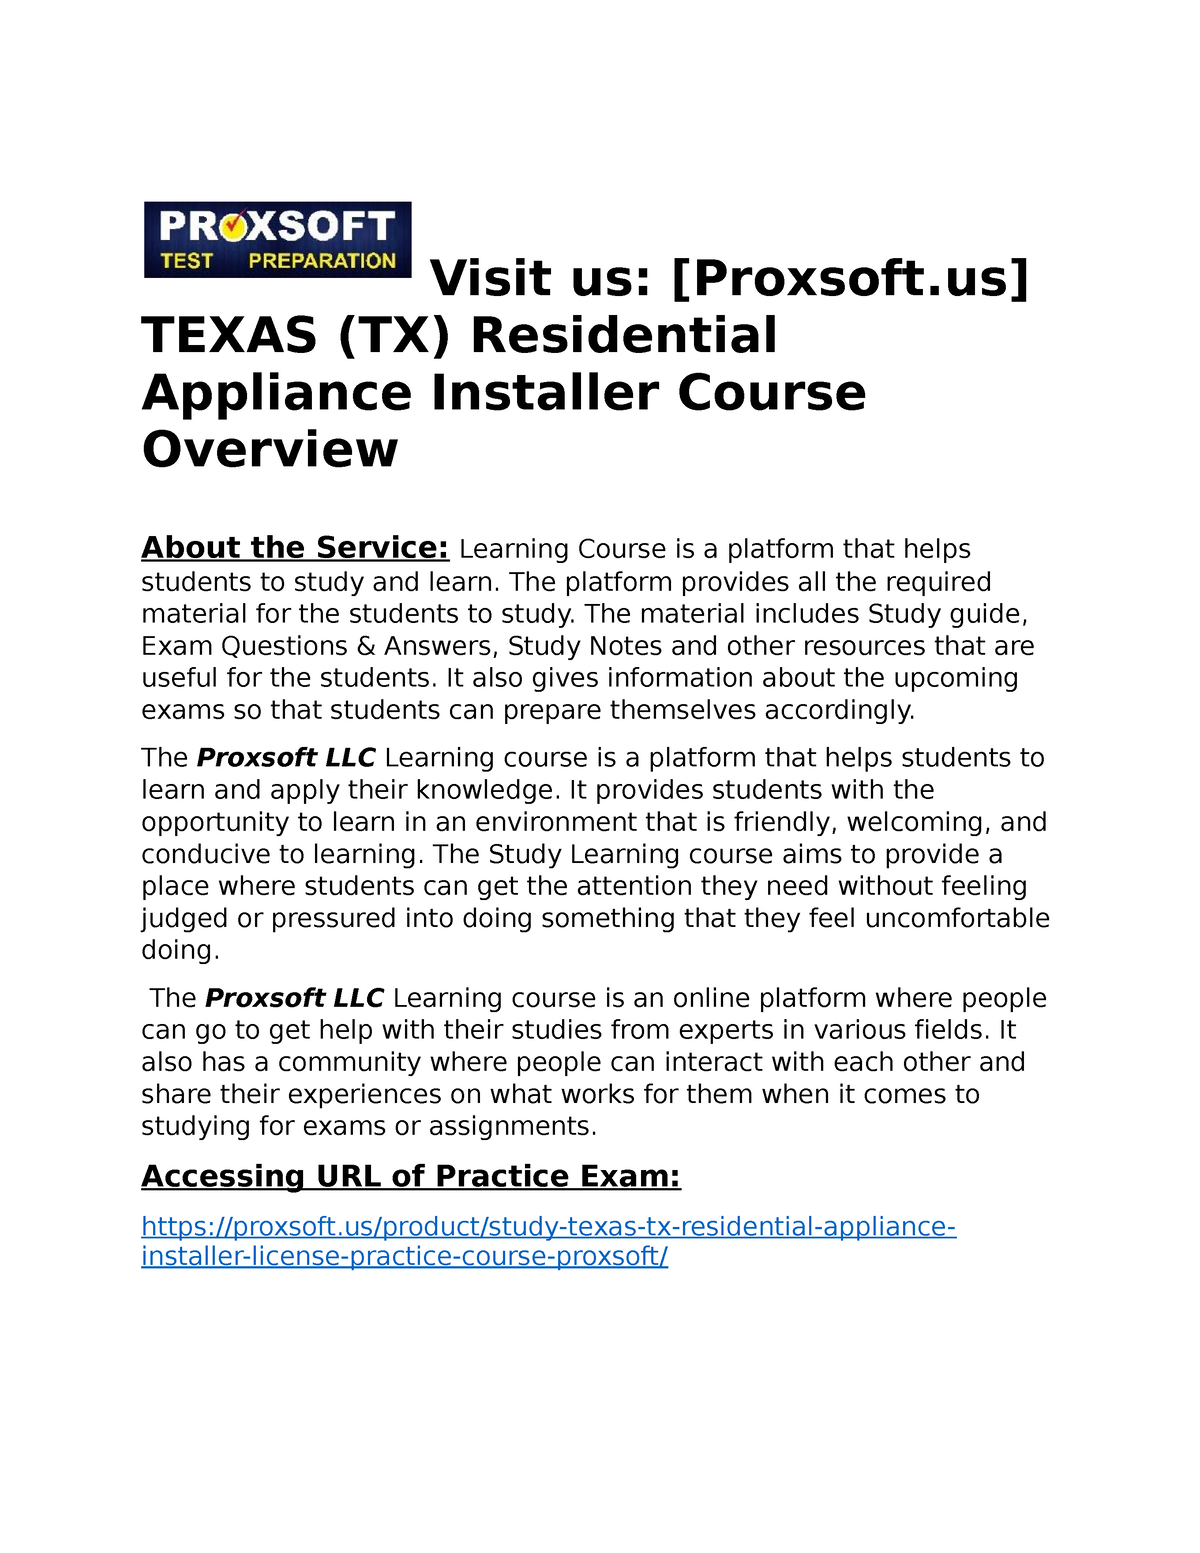 North Carolina residential appliance installer license prep class free download